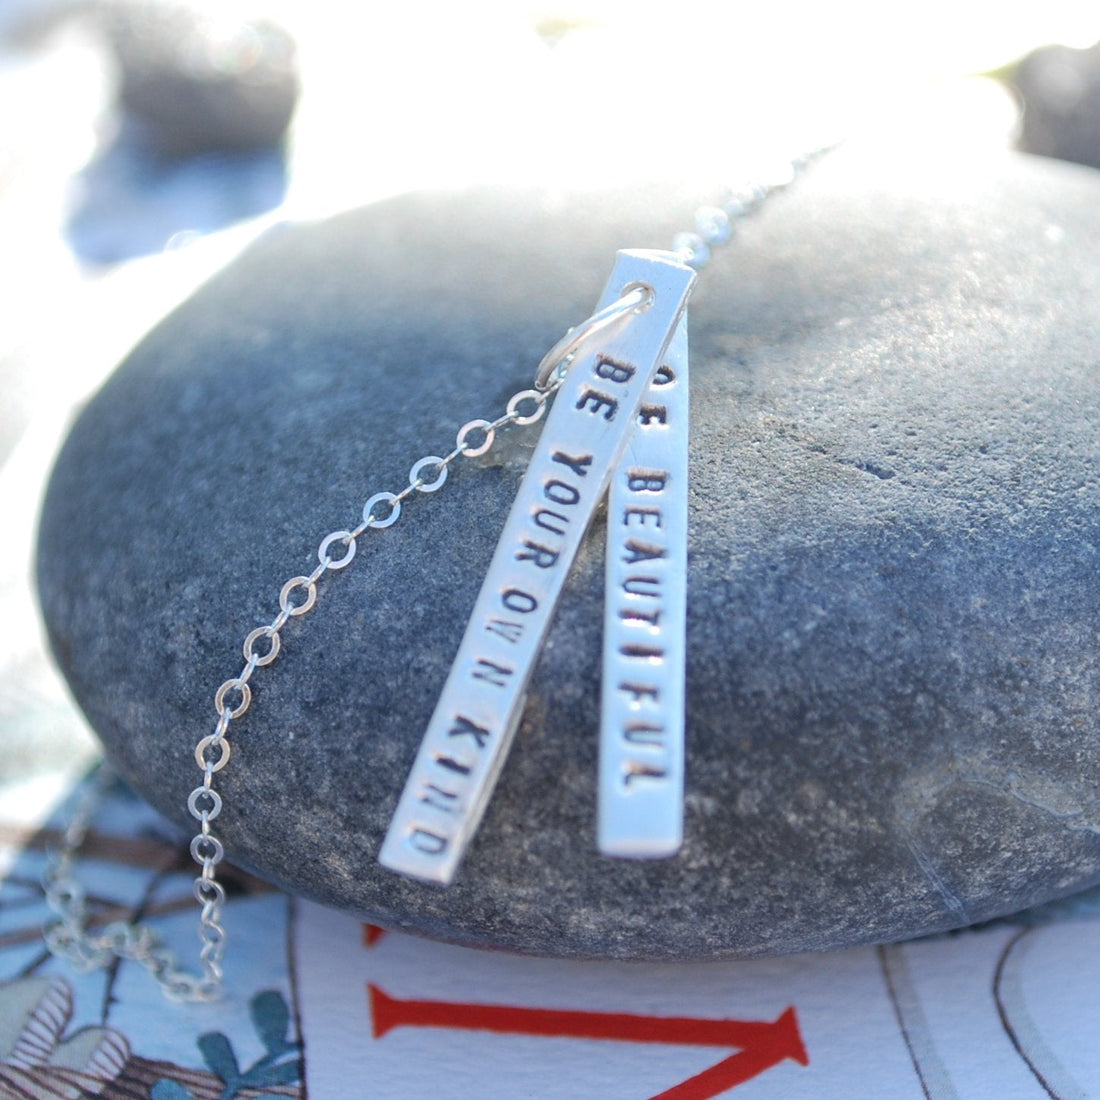 "Be Your Own Kind of Beautiful" Quote Necklace - Chocolate and Steel